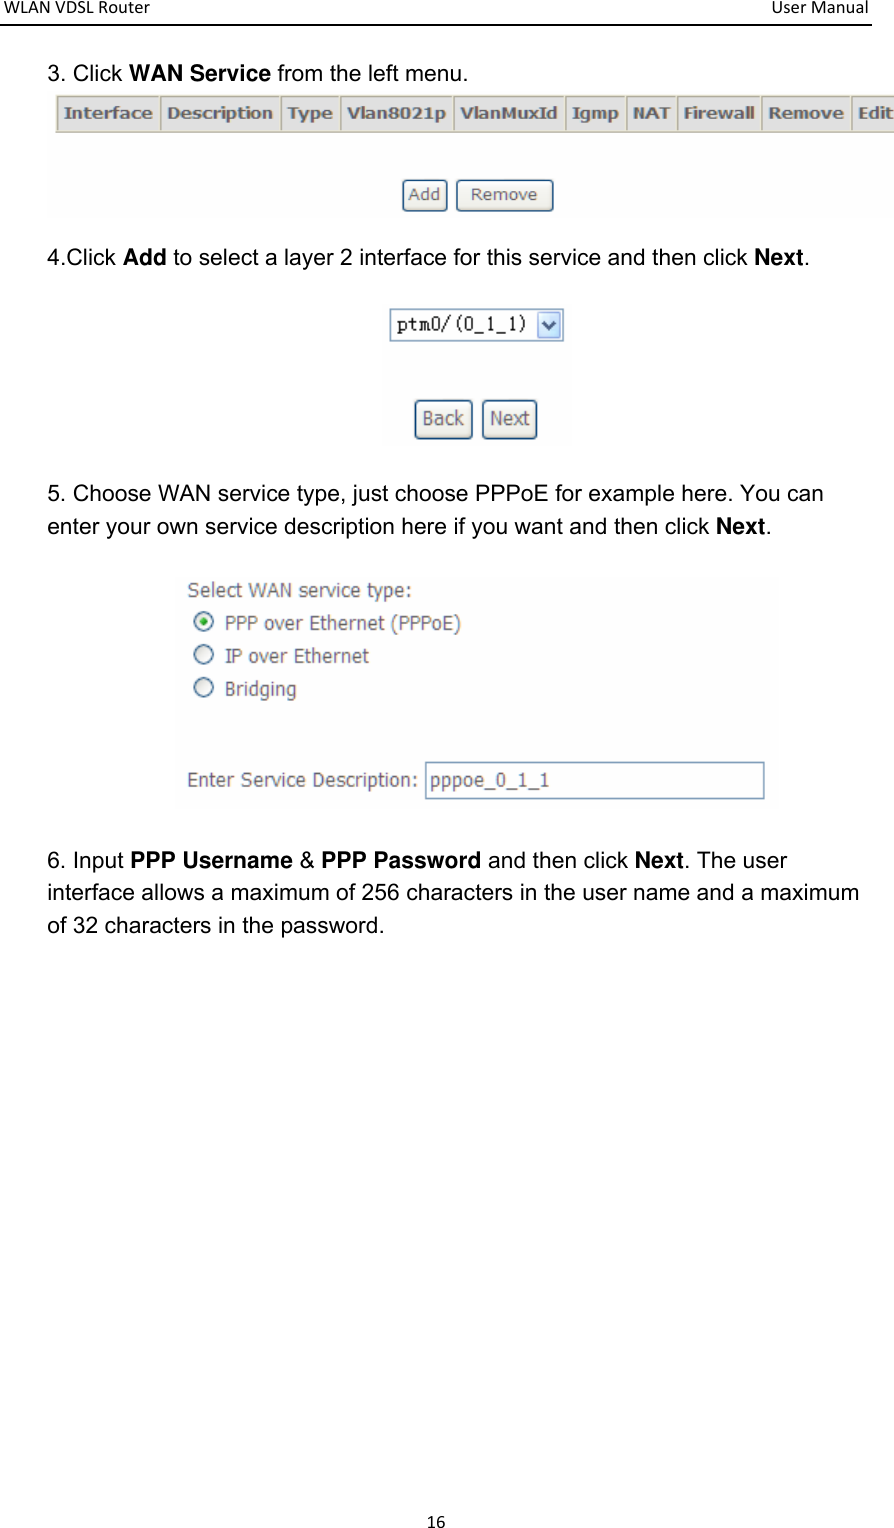 WLANVDSLRouter  UserManual163. Click WAN Service from the left menu.  4.Click Add to select a layer 2 interface for this service and then click Next.  5. Choose WAN service type, just choose PPPoE for example here. You can enter your own service description here if you want and then click Next.  6. Input PPP Username &amp; PPP Password and then click Next. The user interface allows a maximum of 256 characters in the user name and a maximum of 32 characters in the password.   